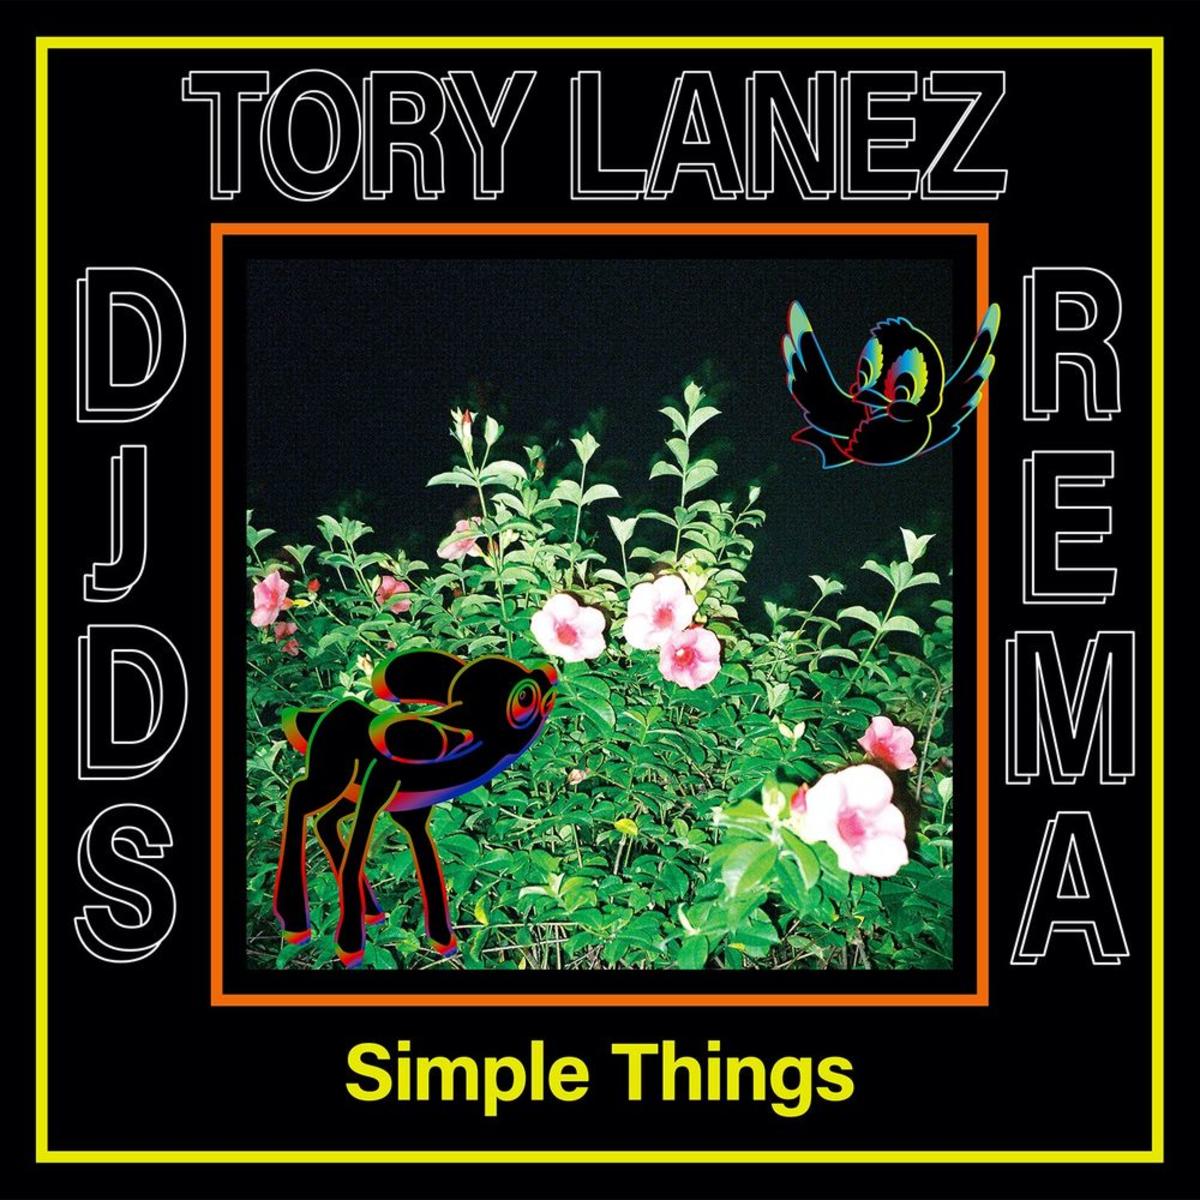 DJDS, Tory Lanez & Rema Join Forces For “Simple Things”